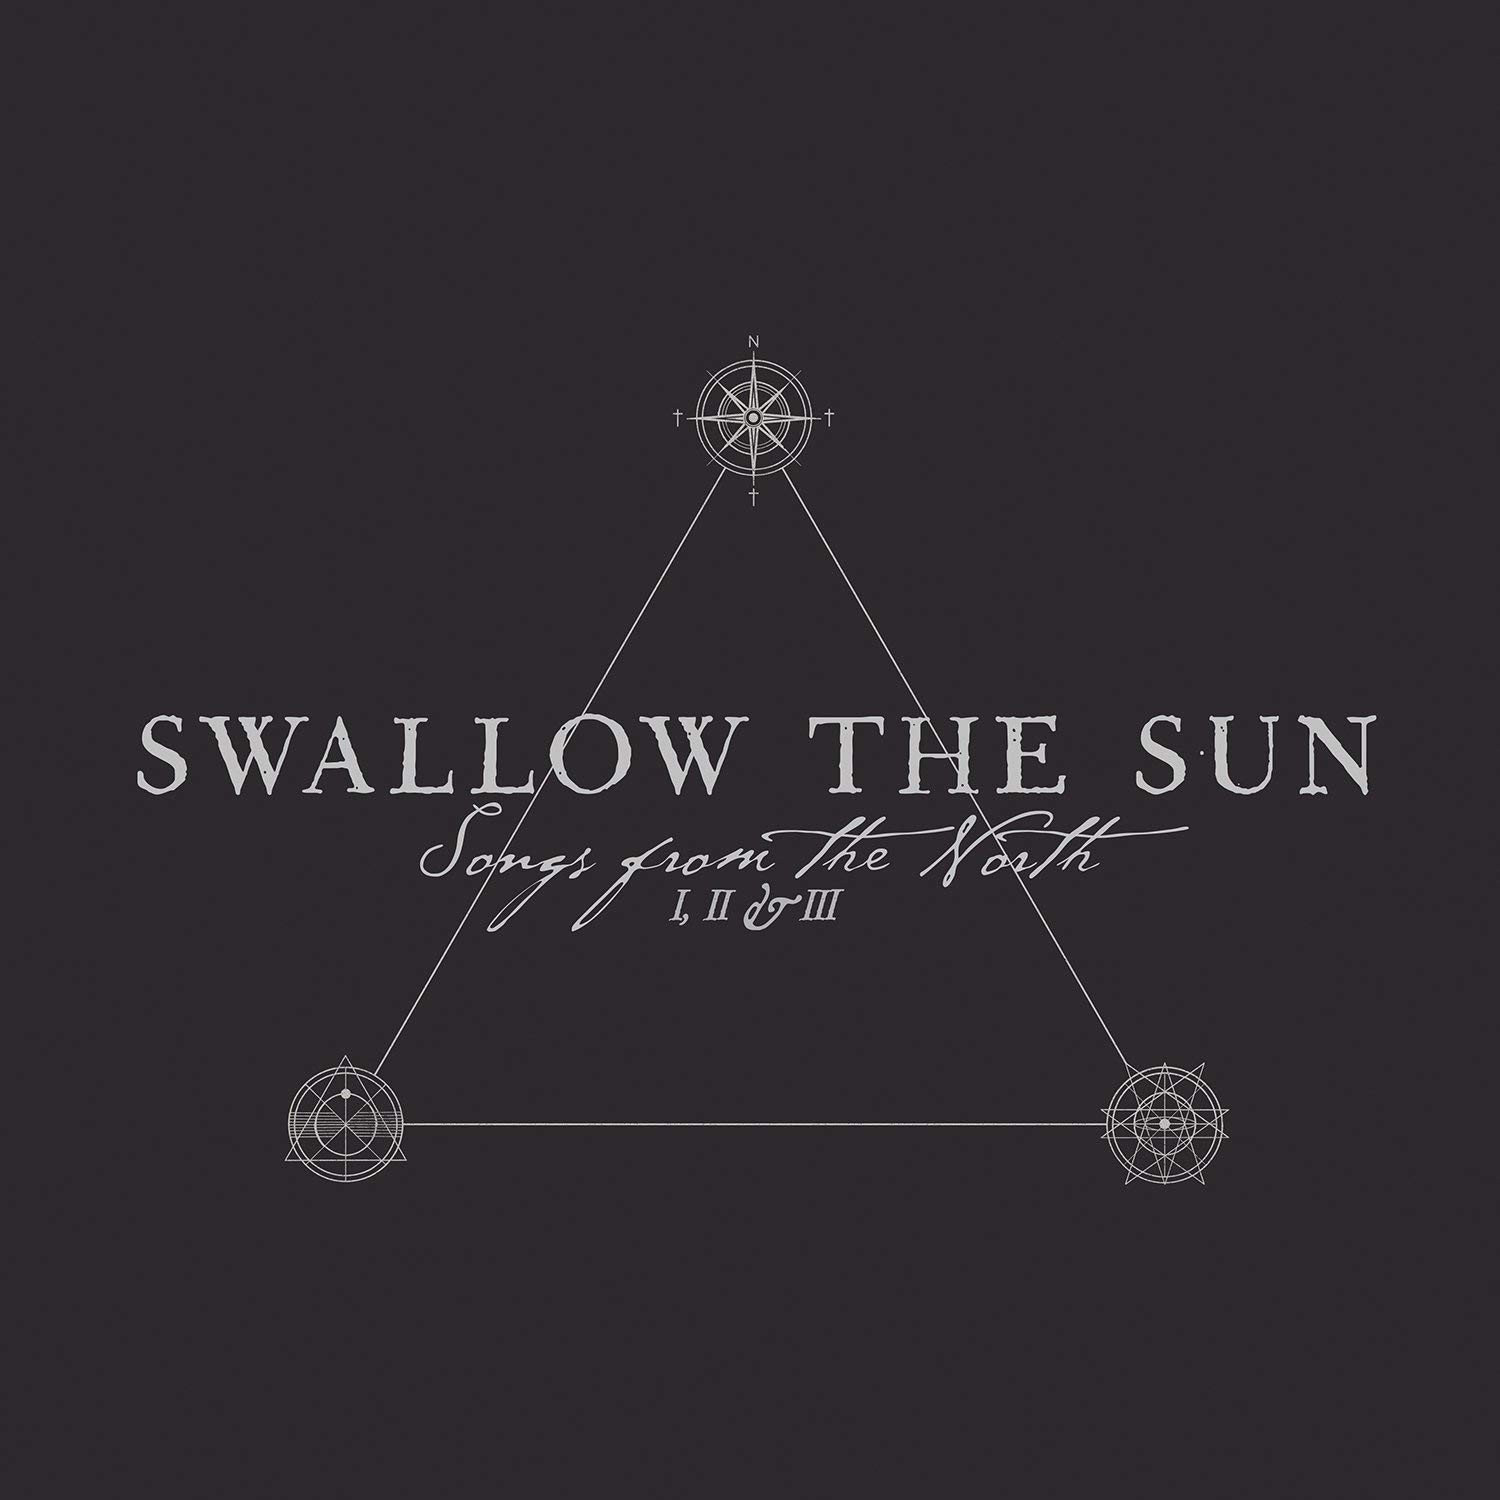 Disque vinyle Swallow The Sun Songs From the North I, II & III (5 LP)